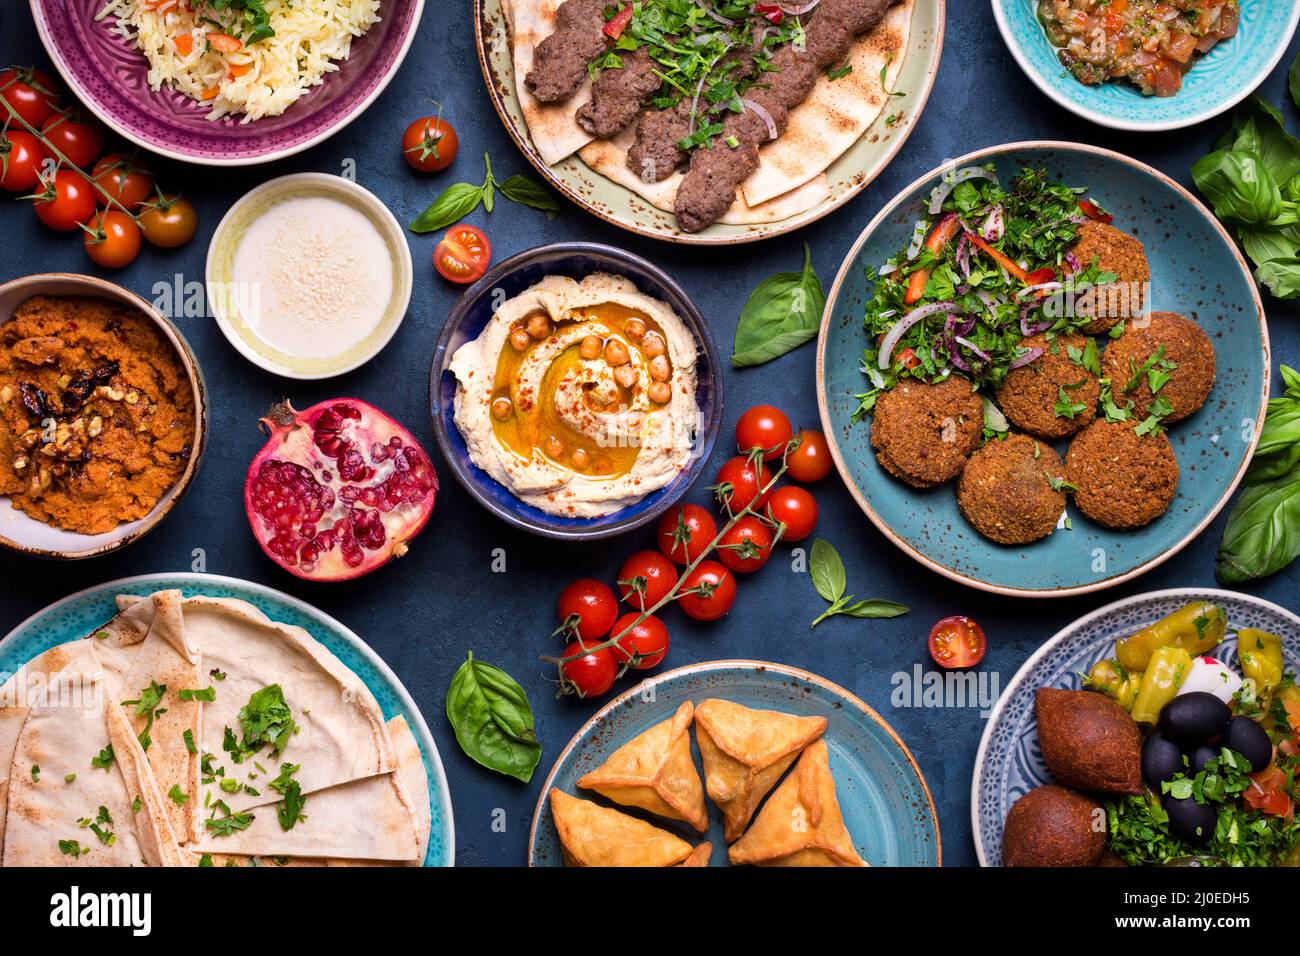 Arabic dishes and meze Stock Photo